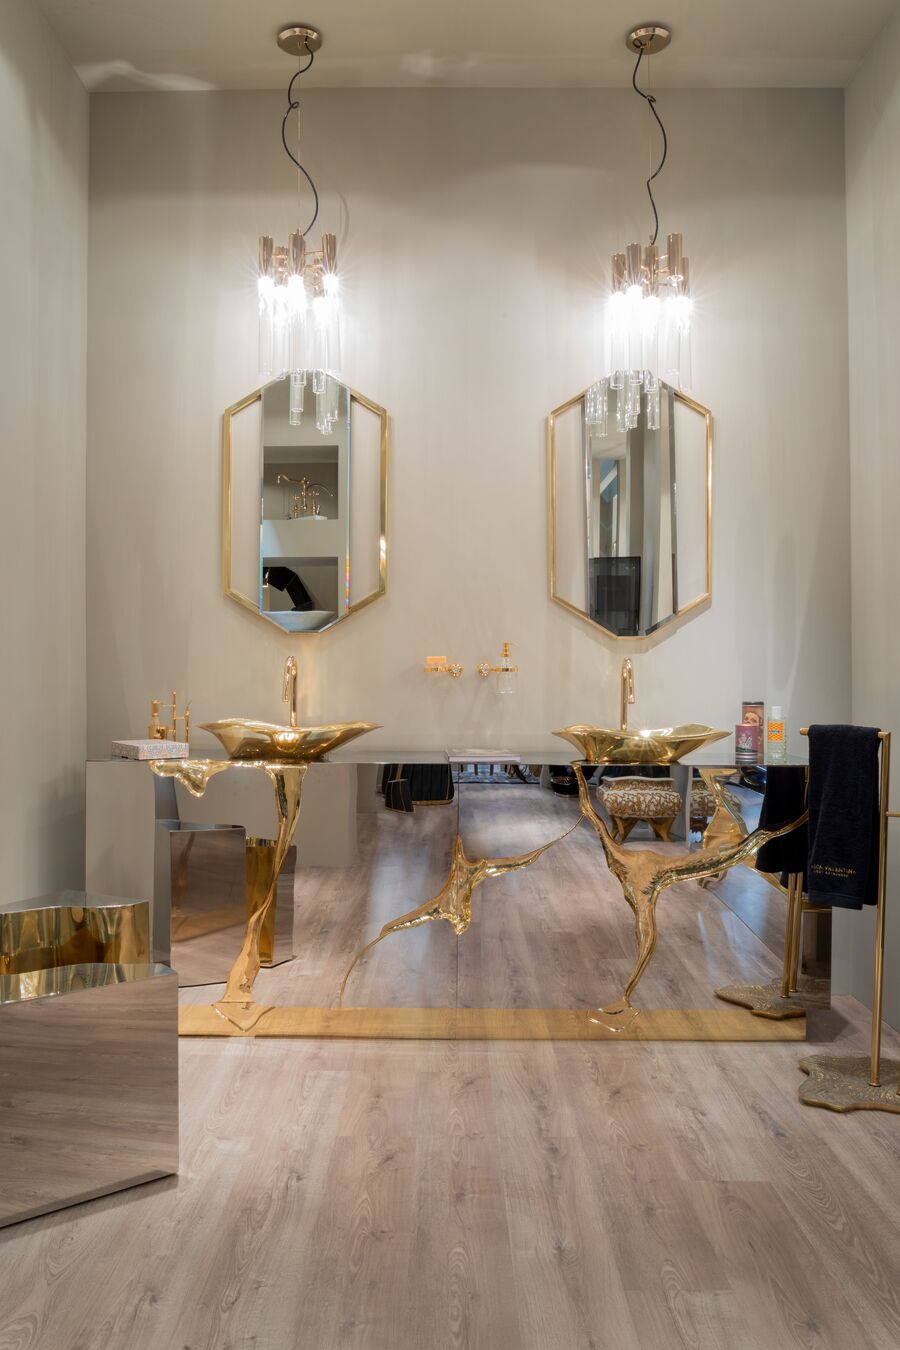 Maison Valentina stand at Salone del mobile isaloni 2022 Get Inspired by the Covet Group Presence at iSaloni 2022 Get Inspired by the Covet Group Presence at iSaloni 2022 14